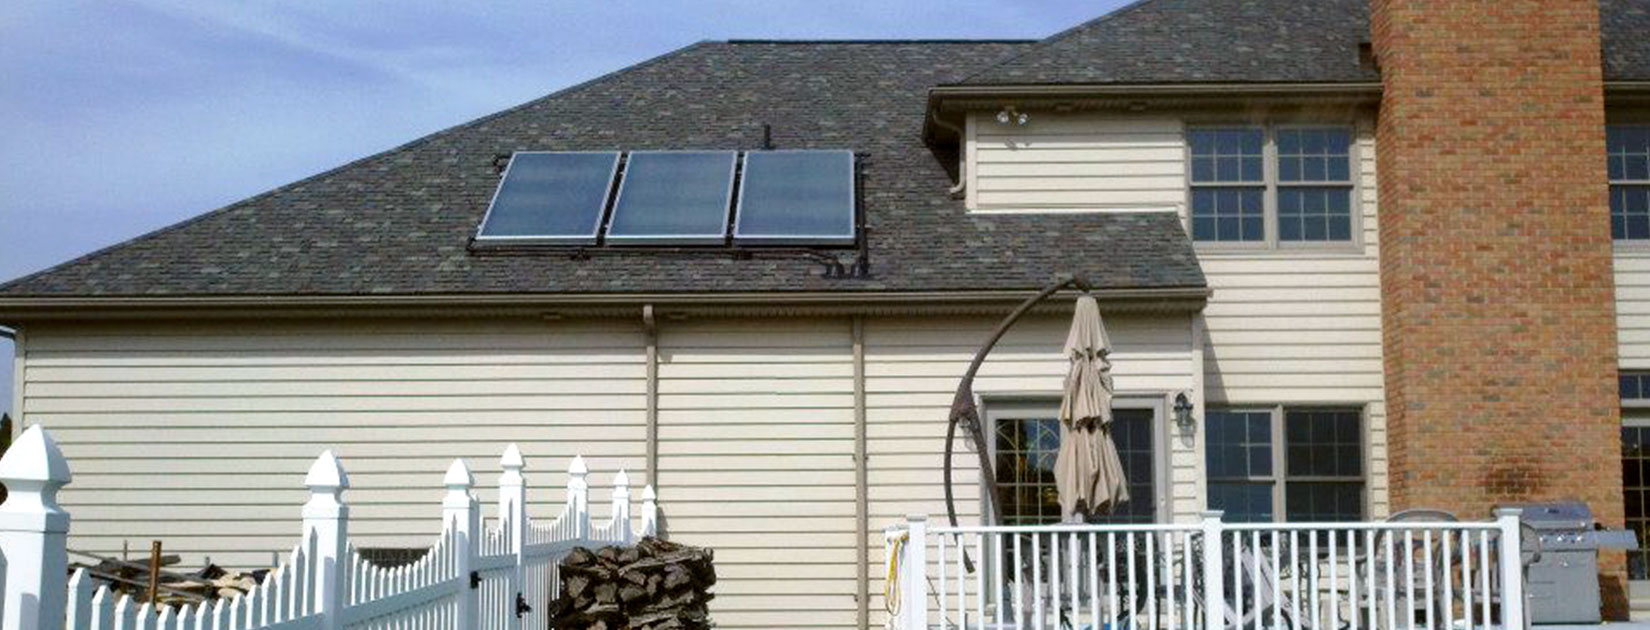 Solar Hot Water Systems Pittsburgh